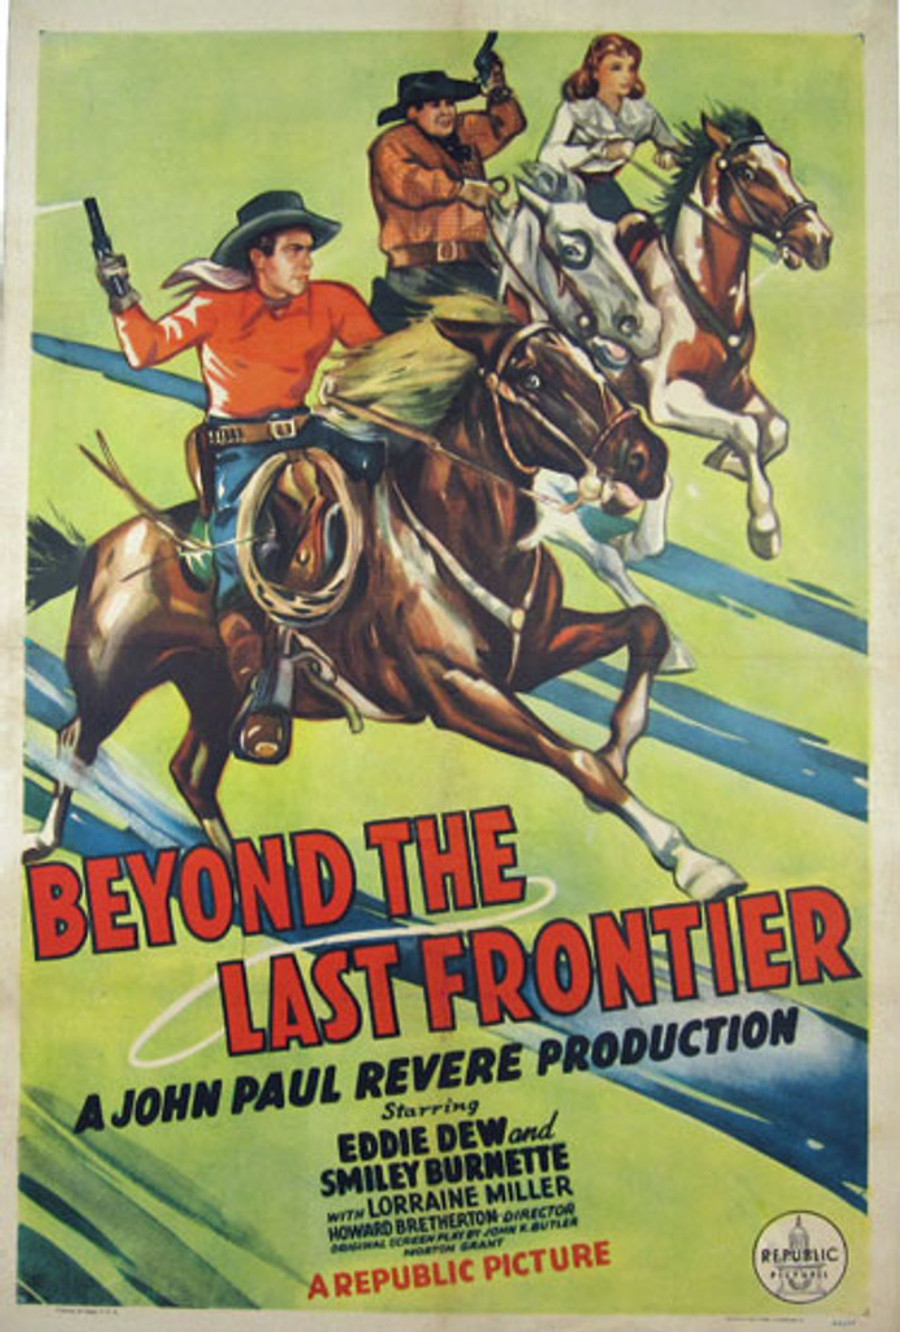 Beyond the last frontier movie poster shows cowboys riding on horses